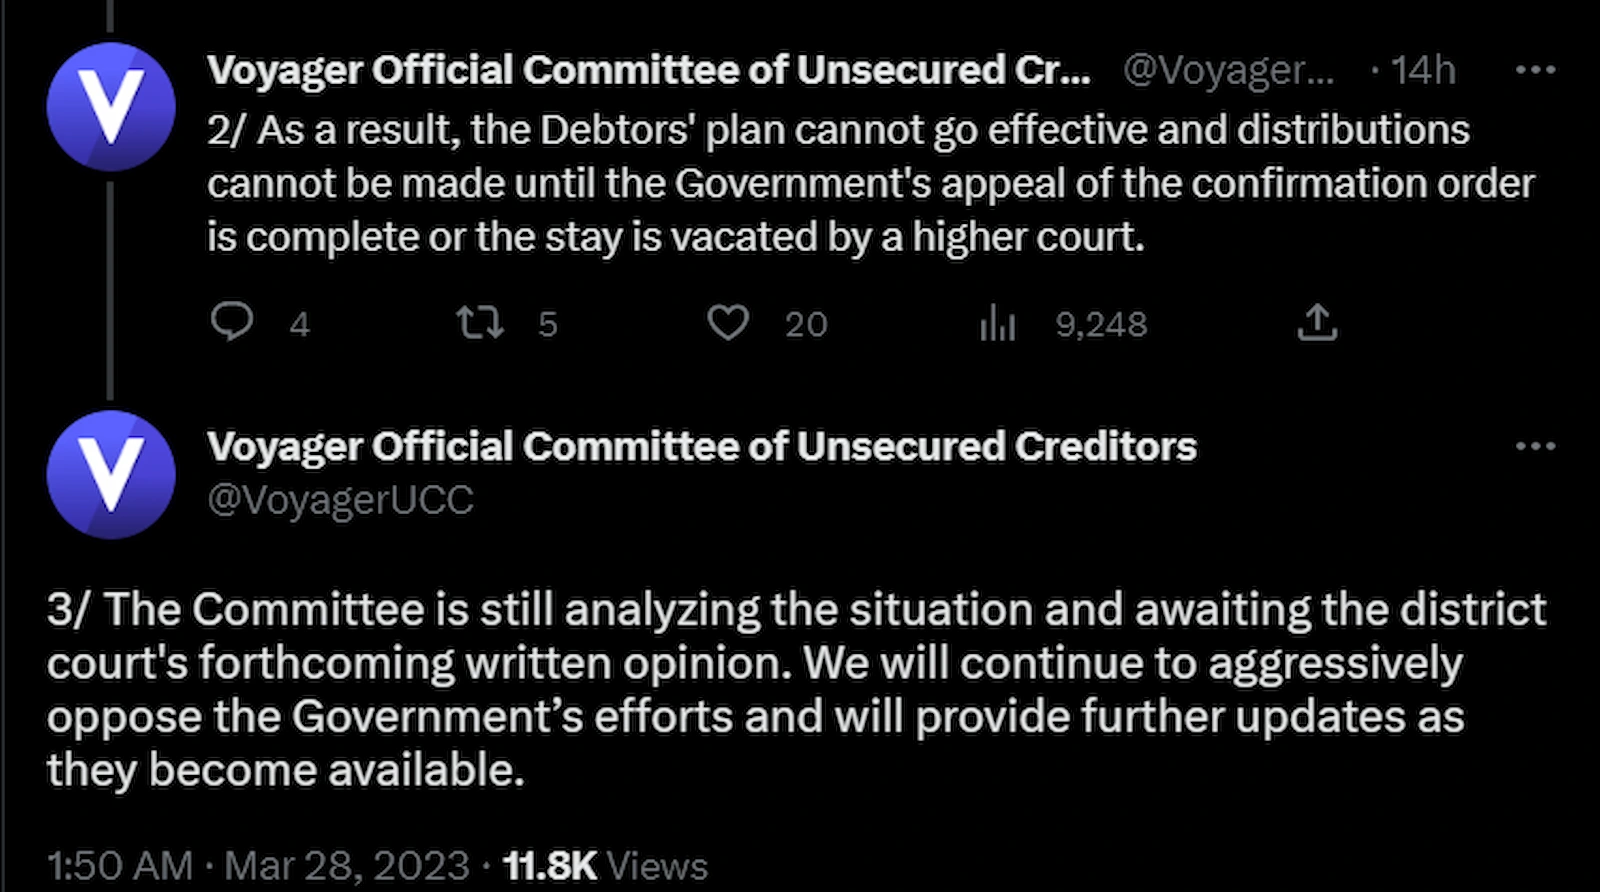 Voyager creditor committee stated it would continue providing further updates regarding the Binance deal